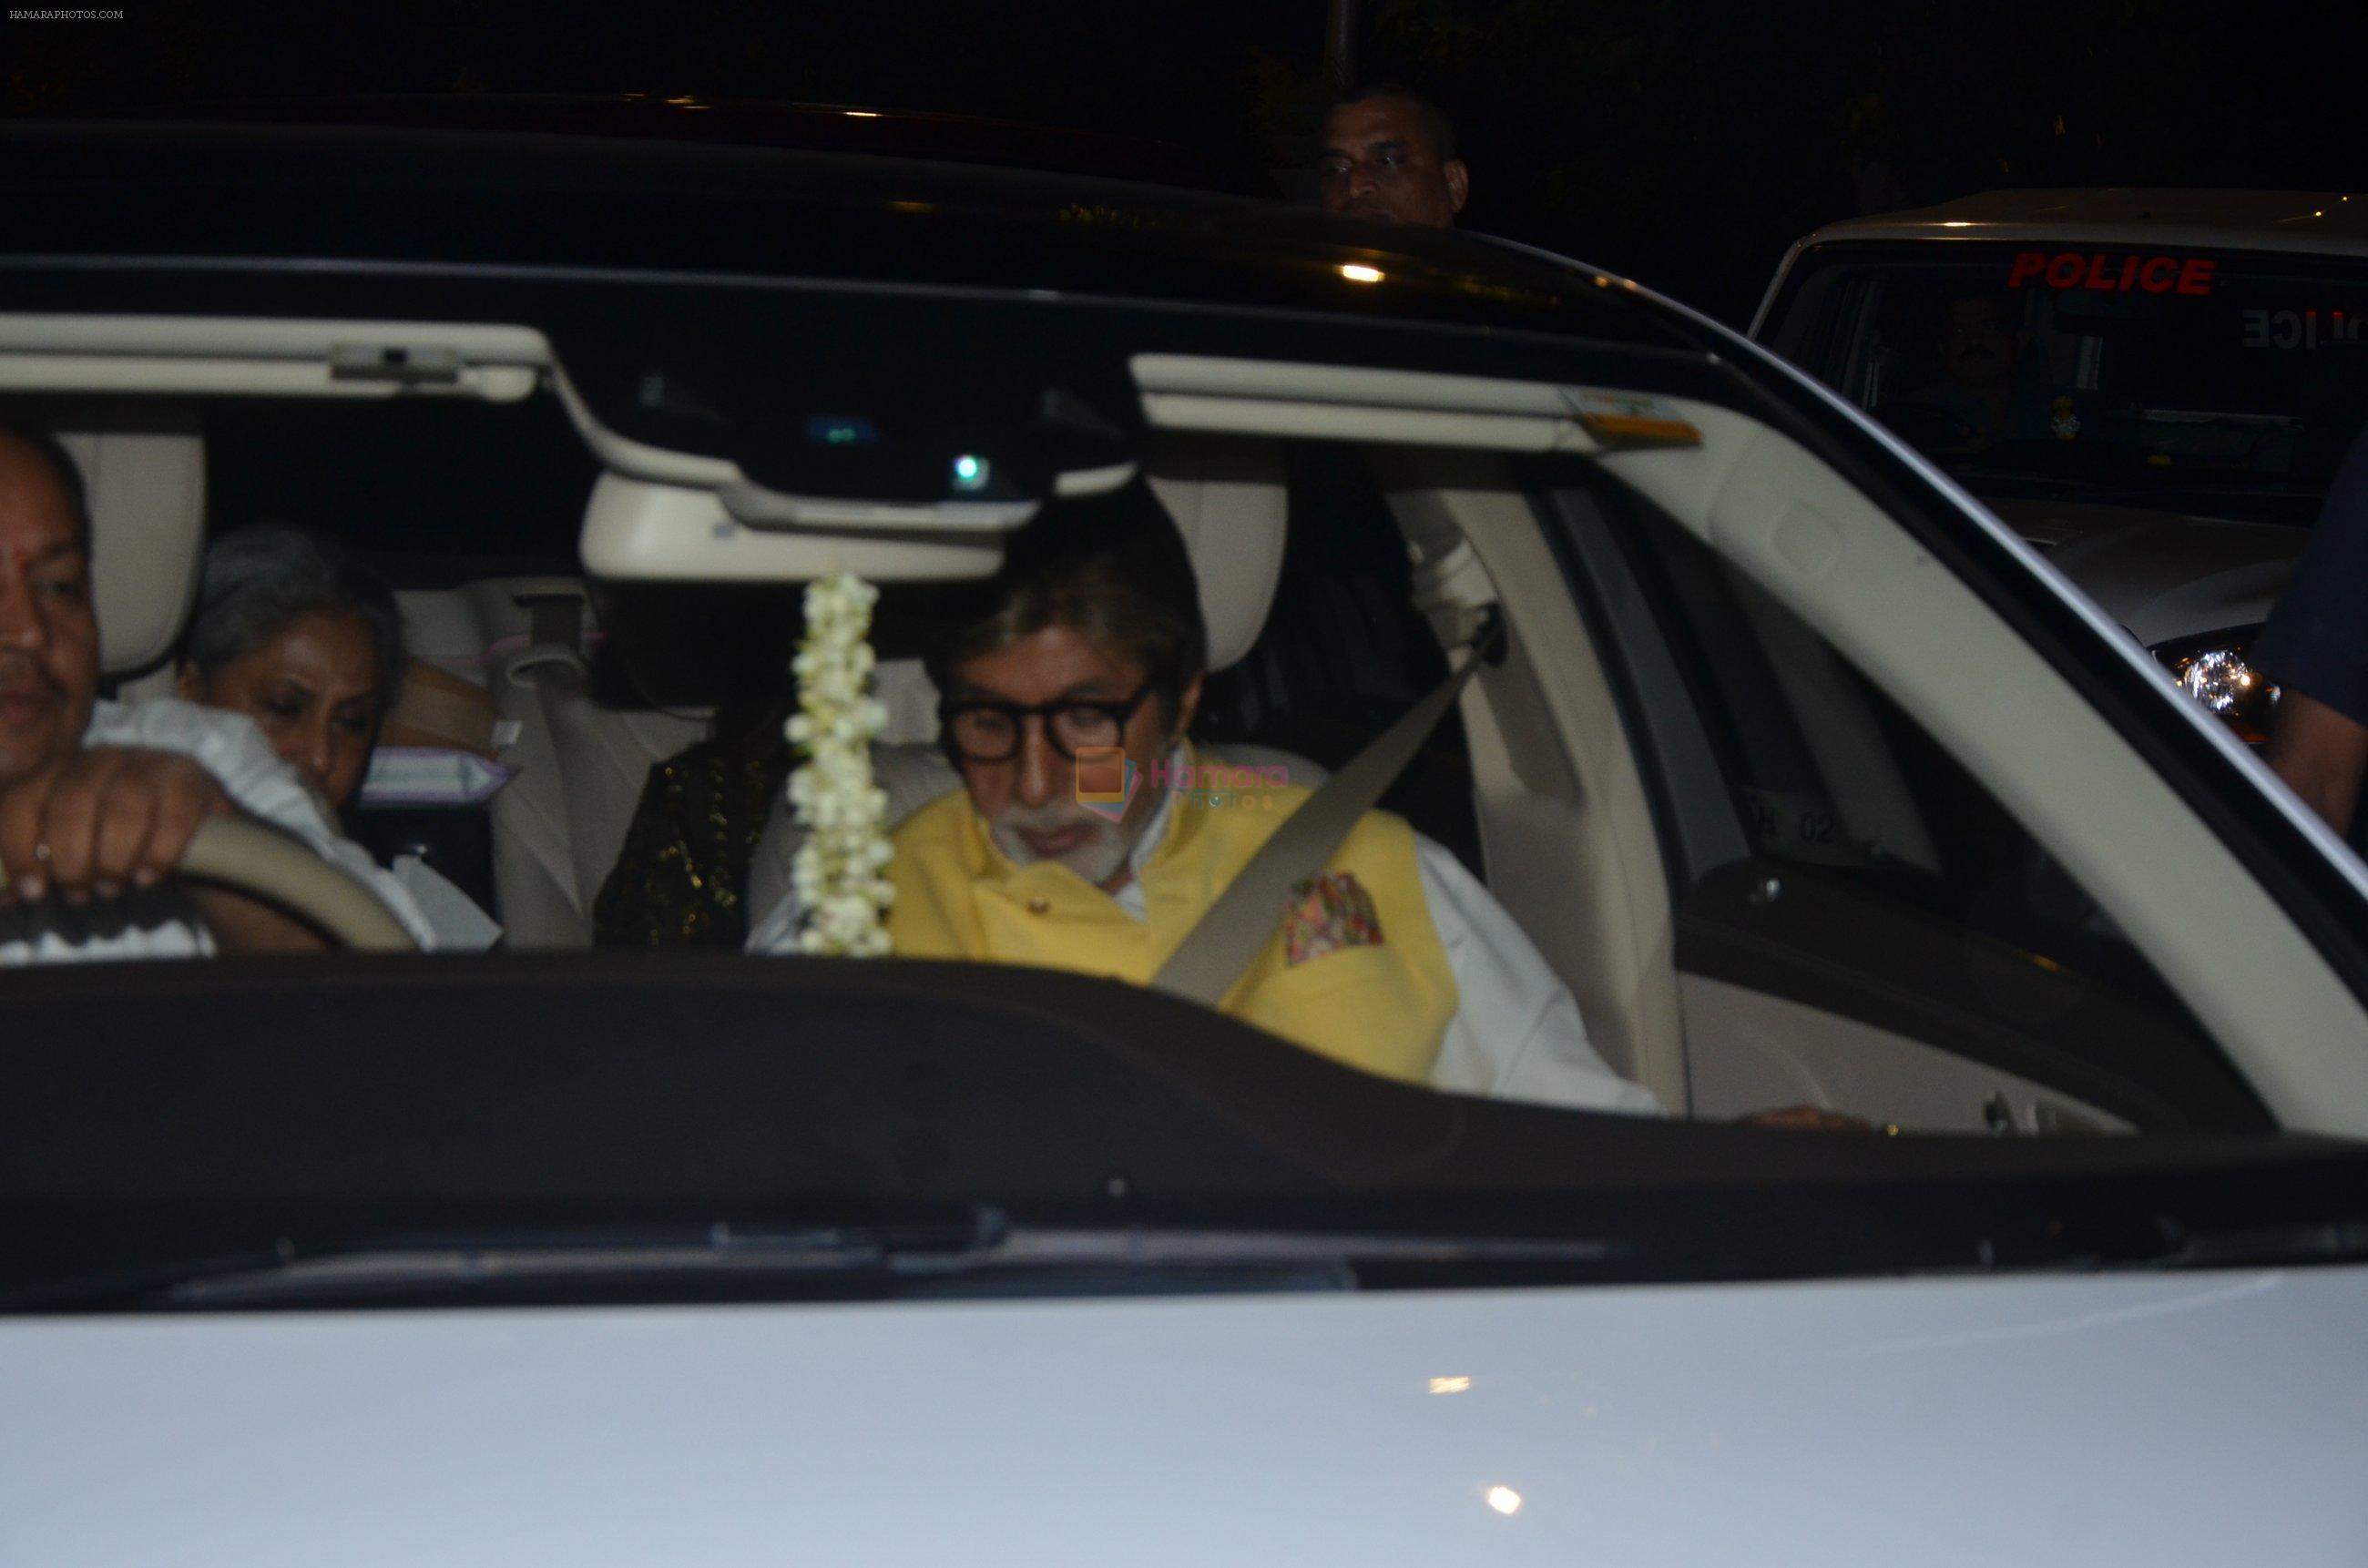 Amitabh Bachchan at Reema jain bday party in Amadeus NCPA on 28th Sept 2016